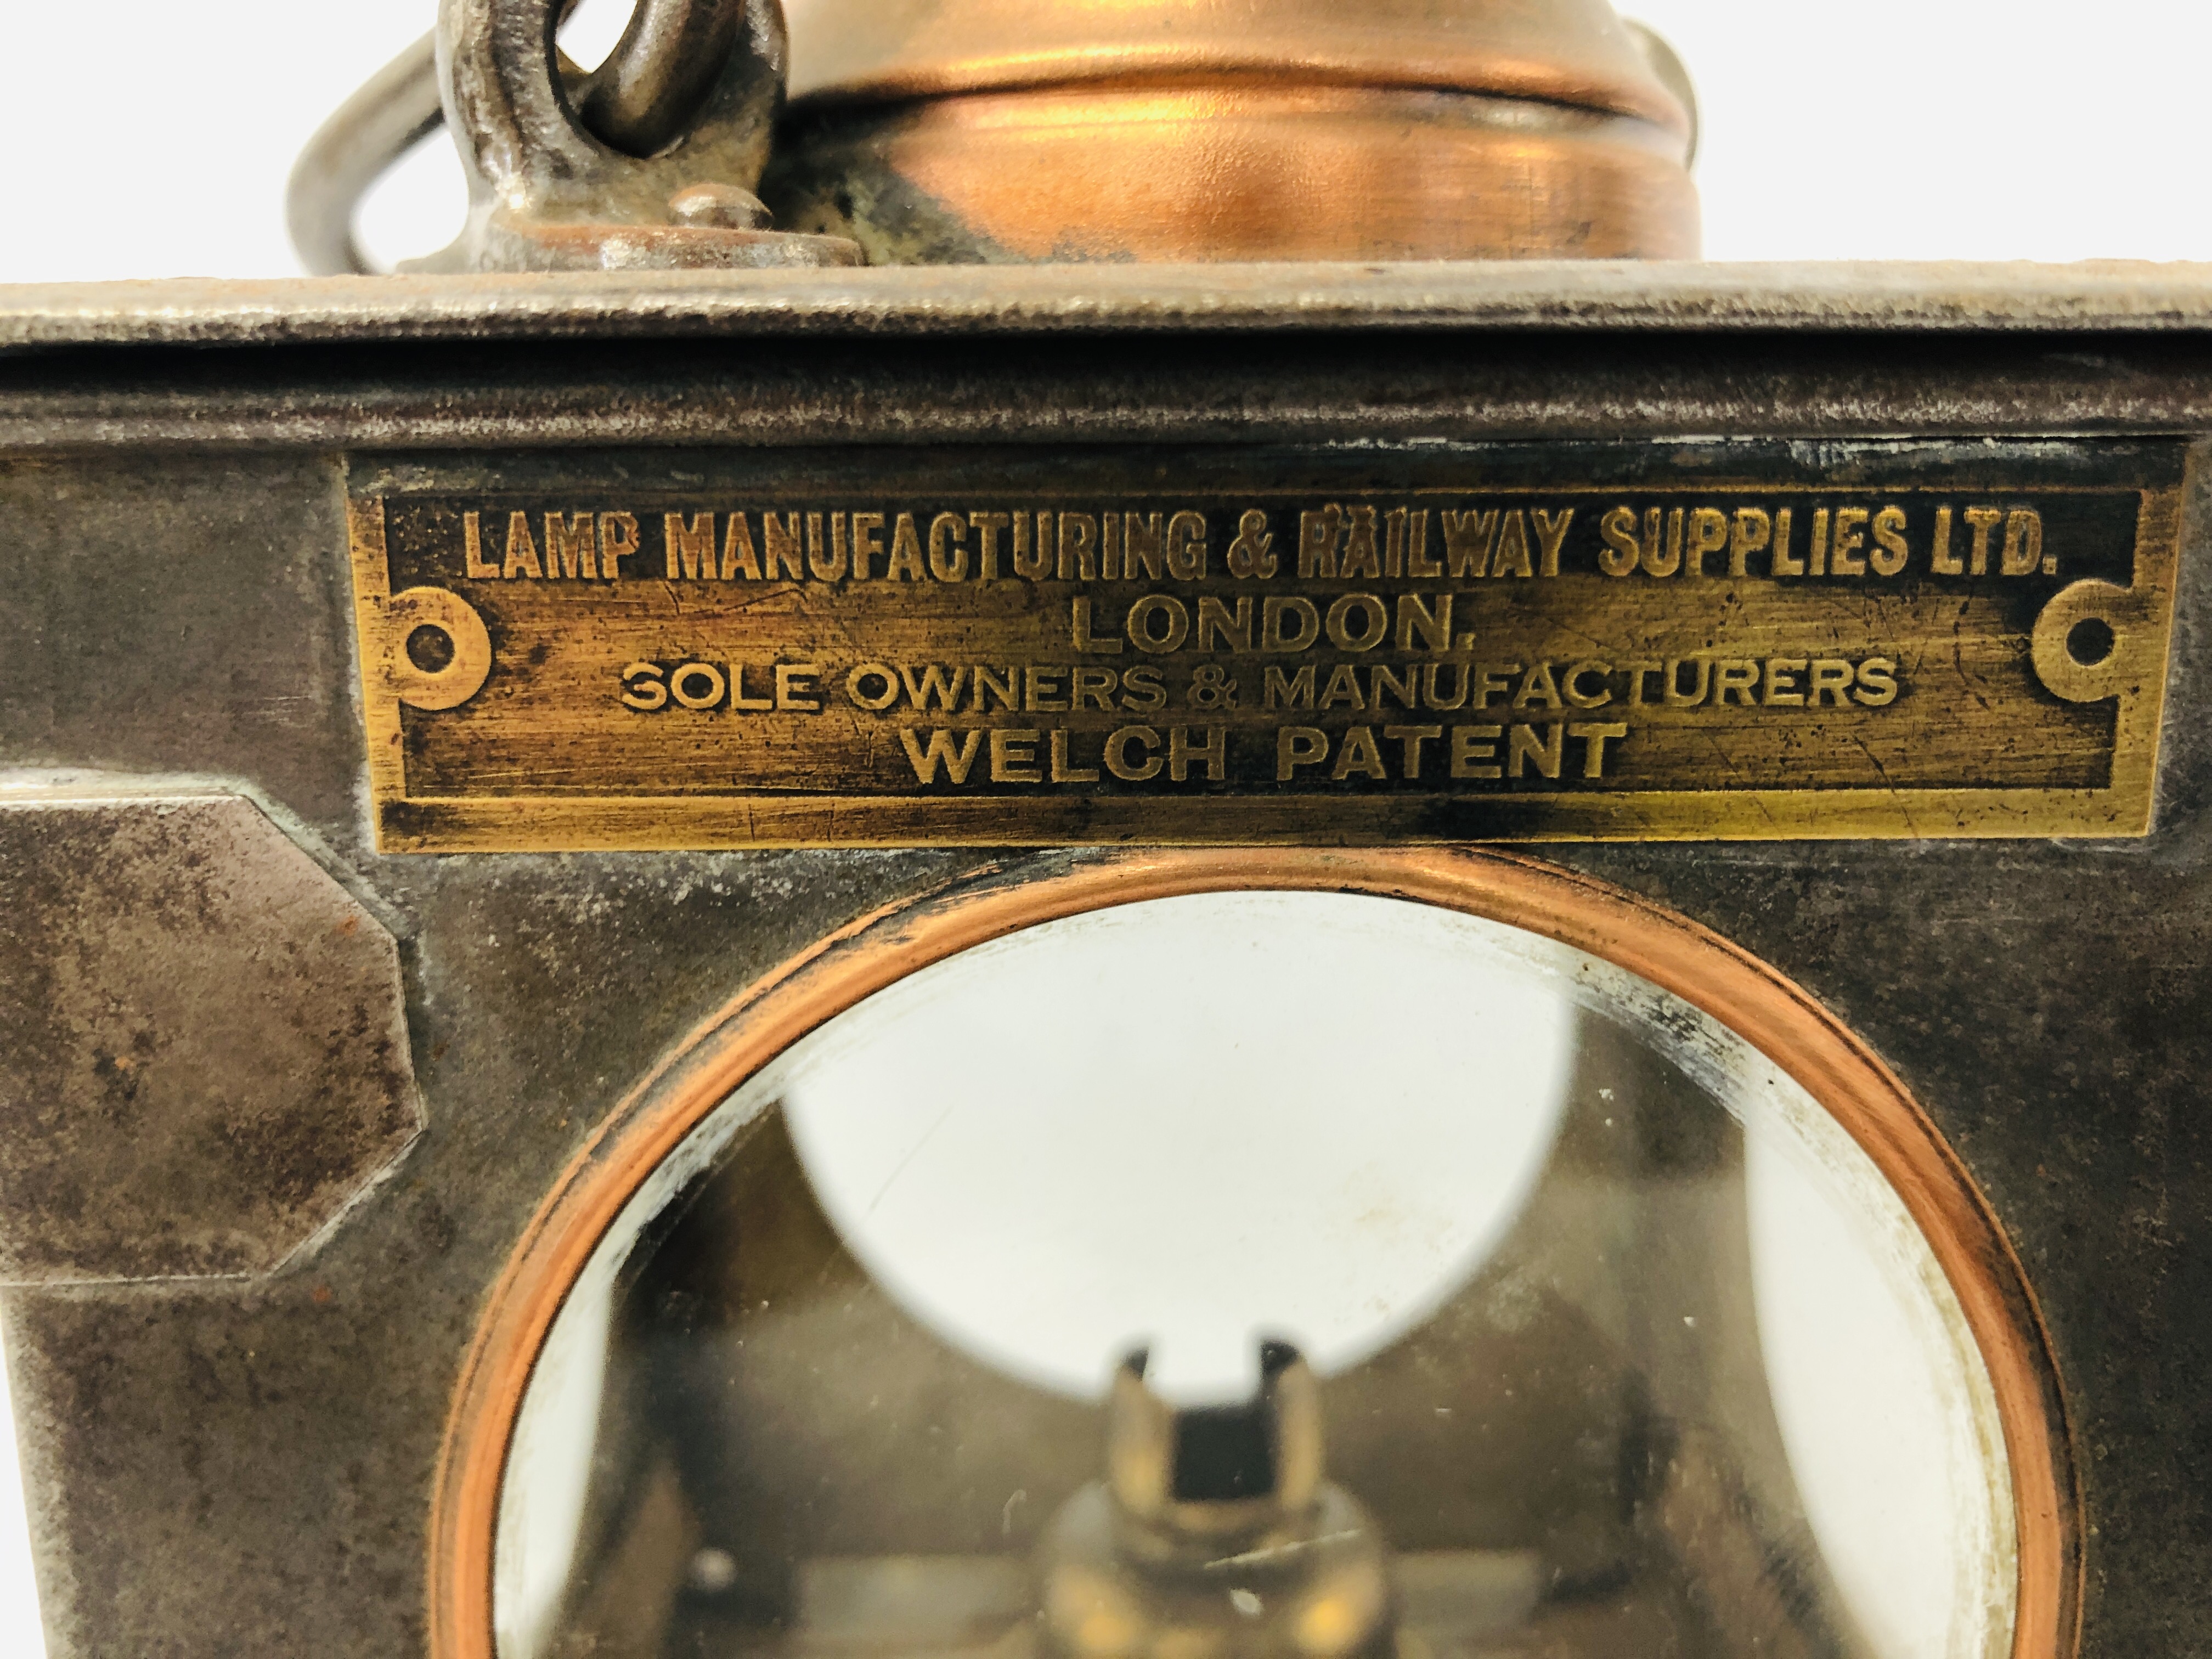 2 X VINTAGE RAILWAY LAMPS "WELCH PATENT" YARMOUTH VAUX & YARMOUTH ST - Image 9 of 13